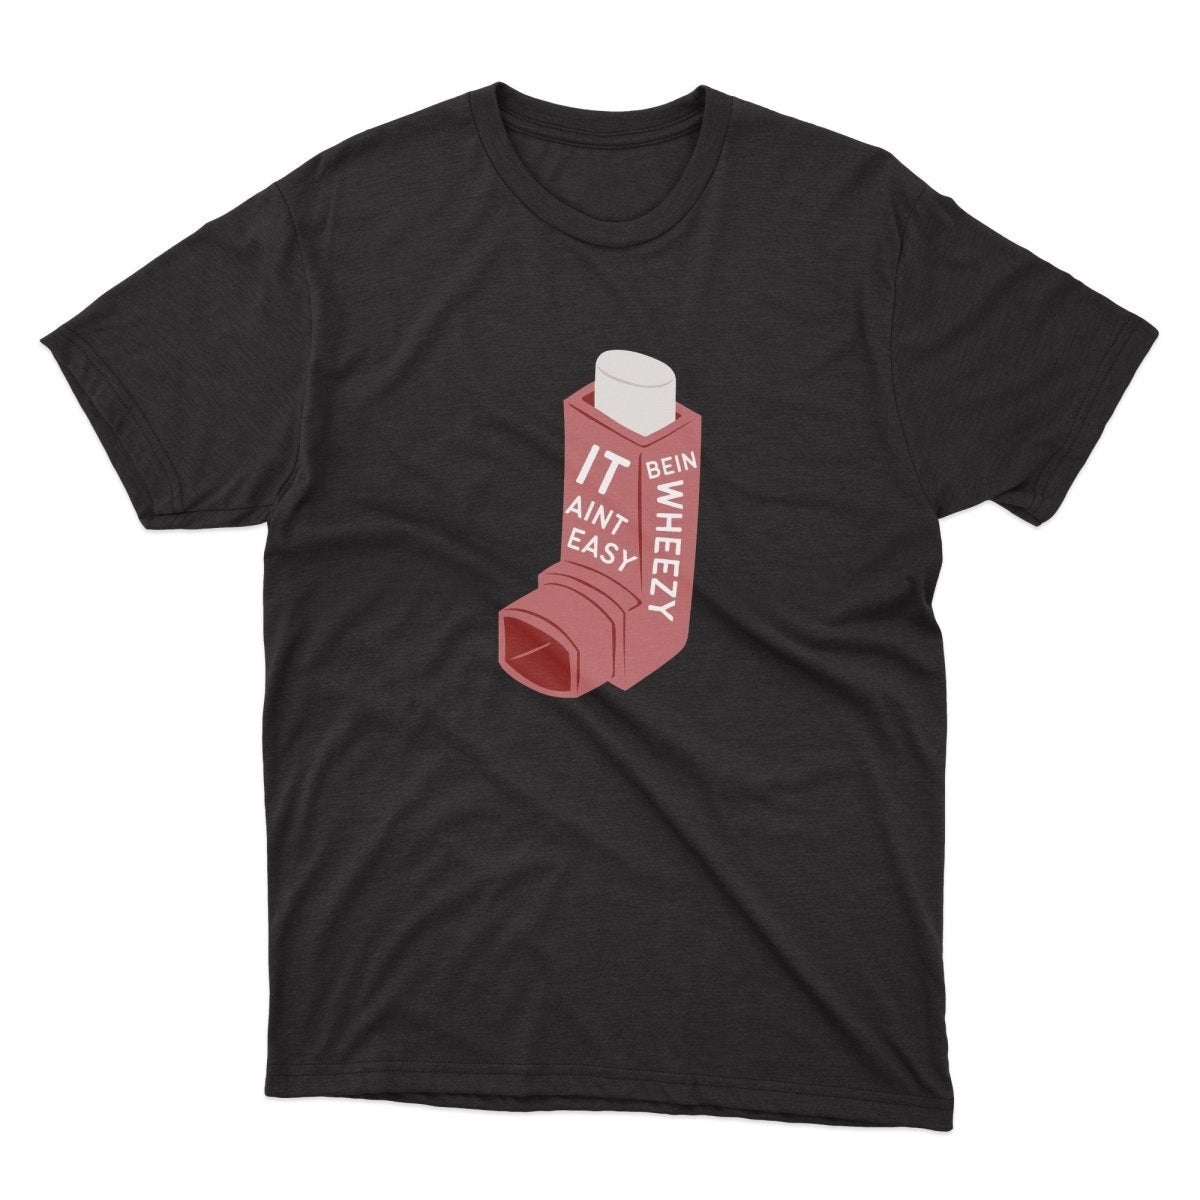 It Ain't Easy Being Wheezy Shirt - stickerbullIt Ain't Easy Being Wheezy ShirtShirtsPrintifystickerbull24341457397768929771BlackSa black t - shirt with a red tube that says it's okay to